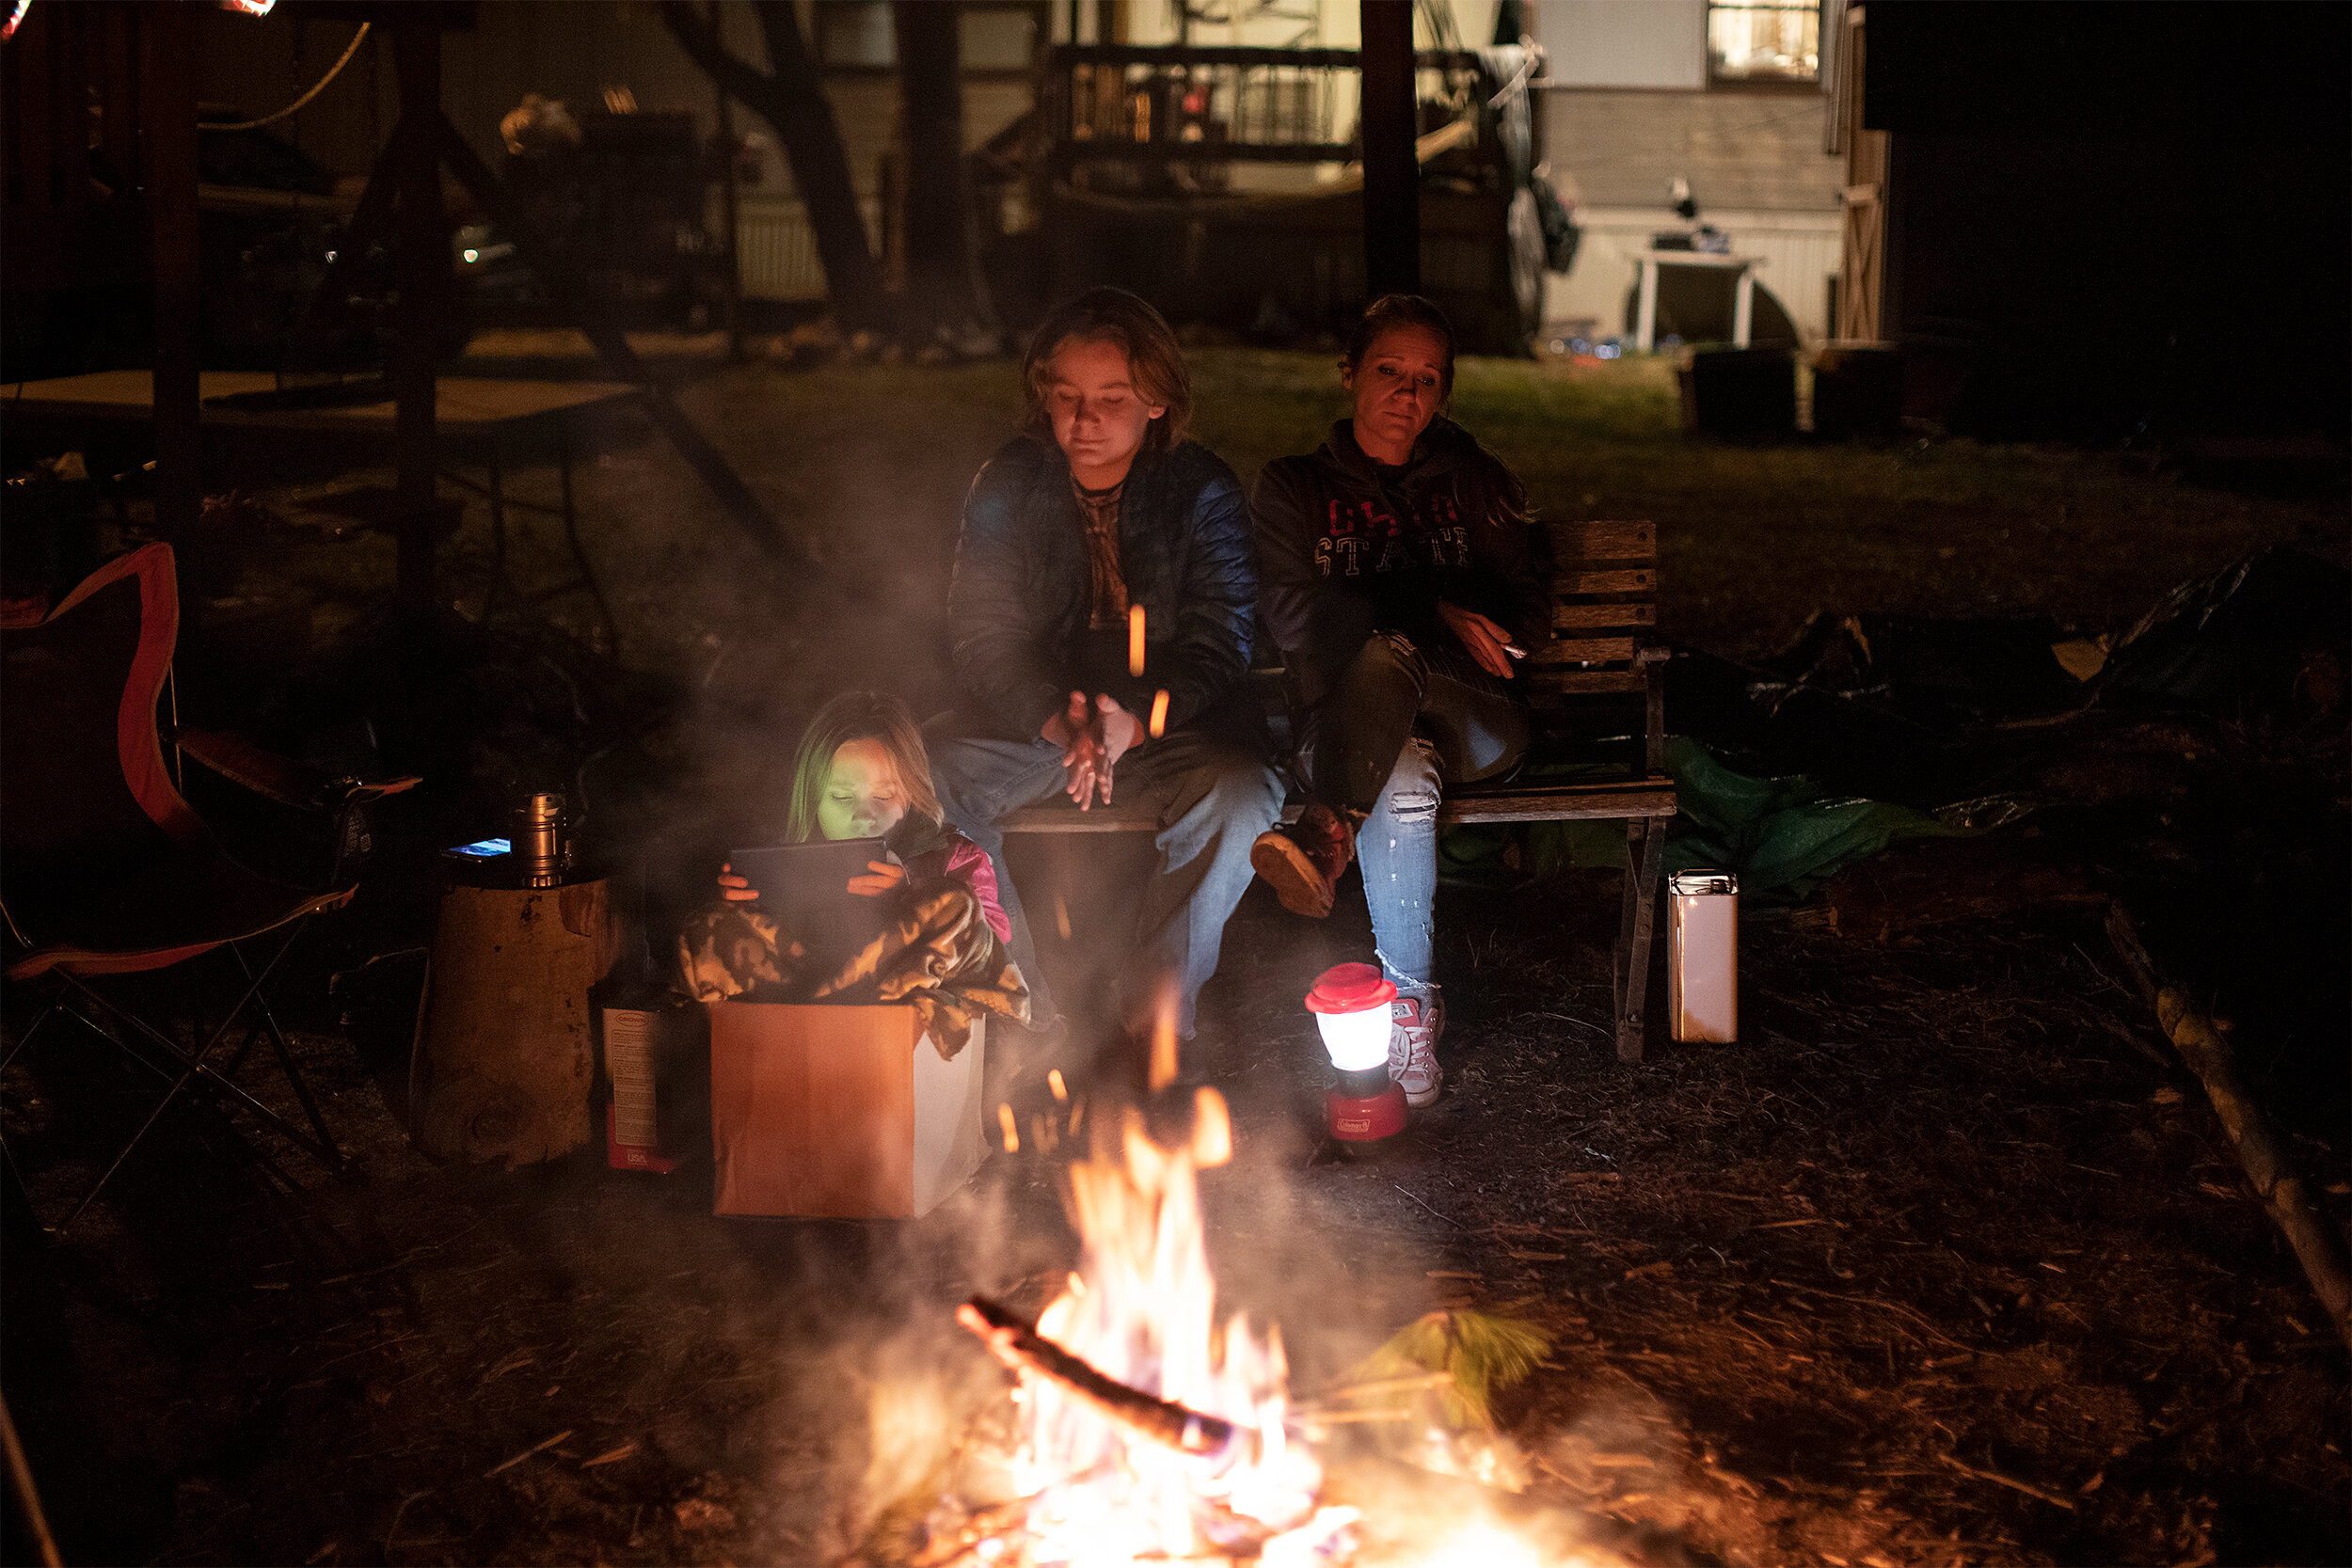  Lindsey Doughty sits with her son, Aiden, and daughter, Grace, outside by a campfire after Thanksgiving dinner at their home in Corning, Ohio, on November 28, 2019. Doughty finds more comfort having a quiet celebration with her two children than dea